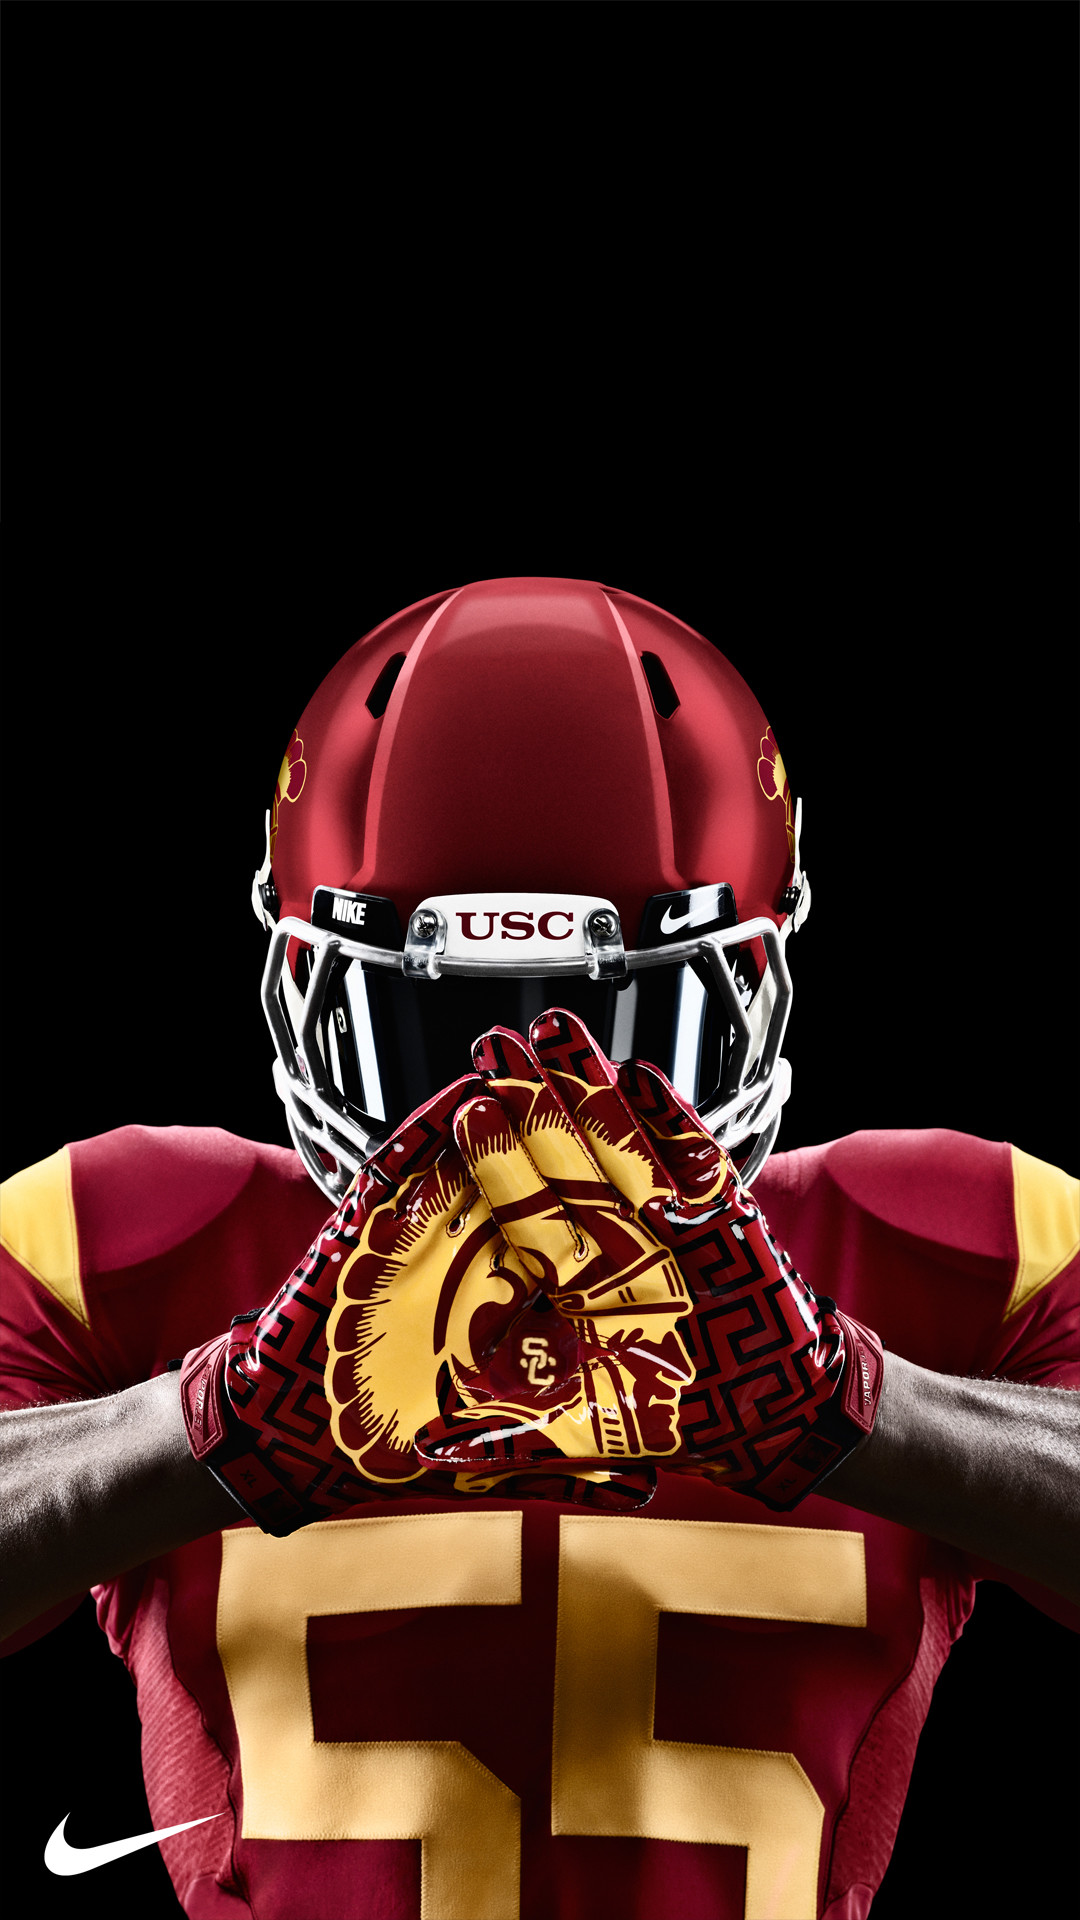 1080x1920 USC Nike Gloves - Best htc one wallpapers, free and easy ... nike american  football ...